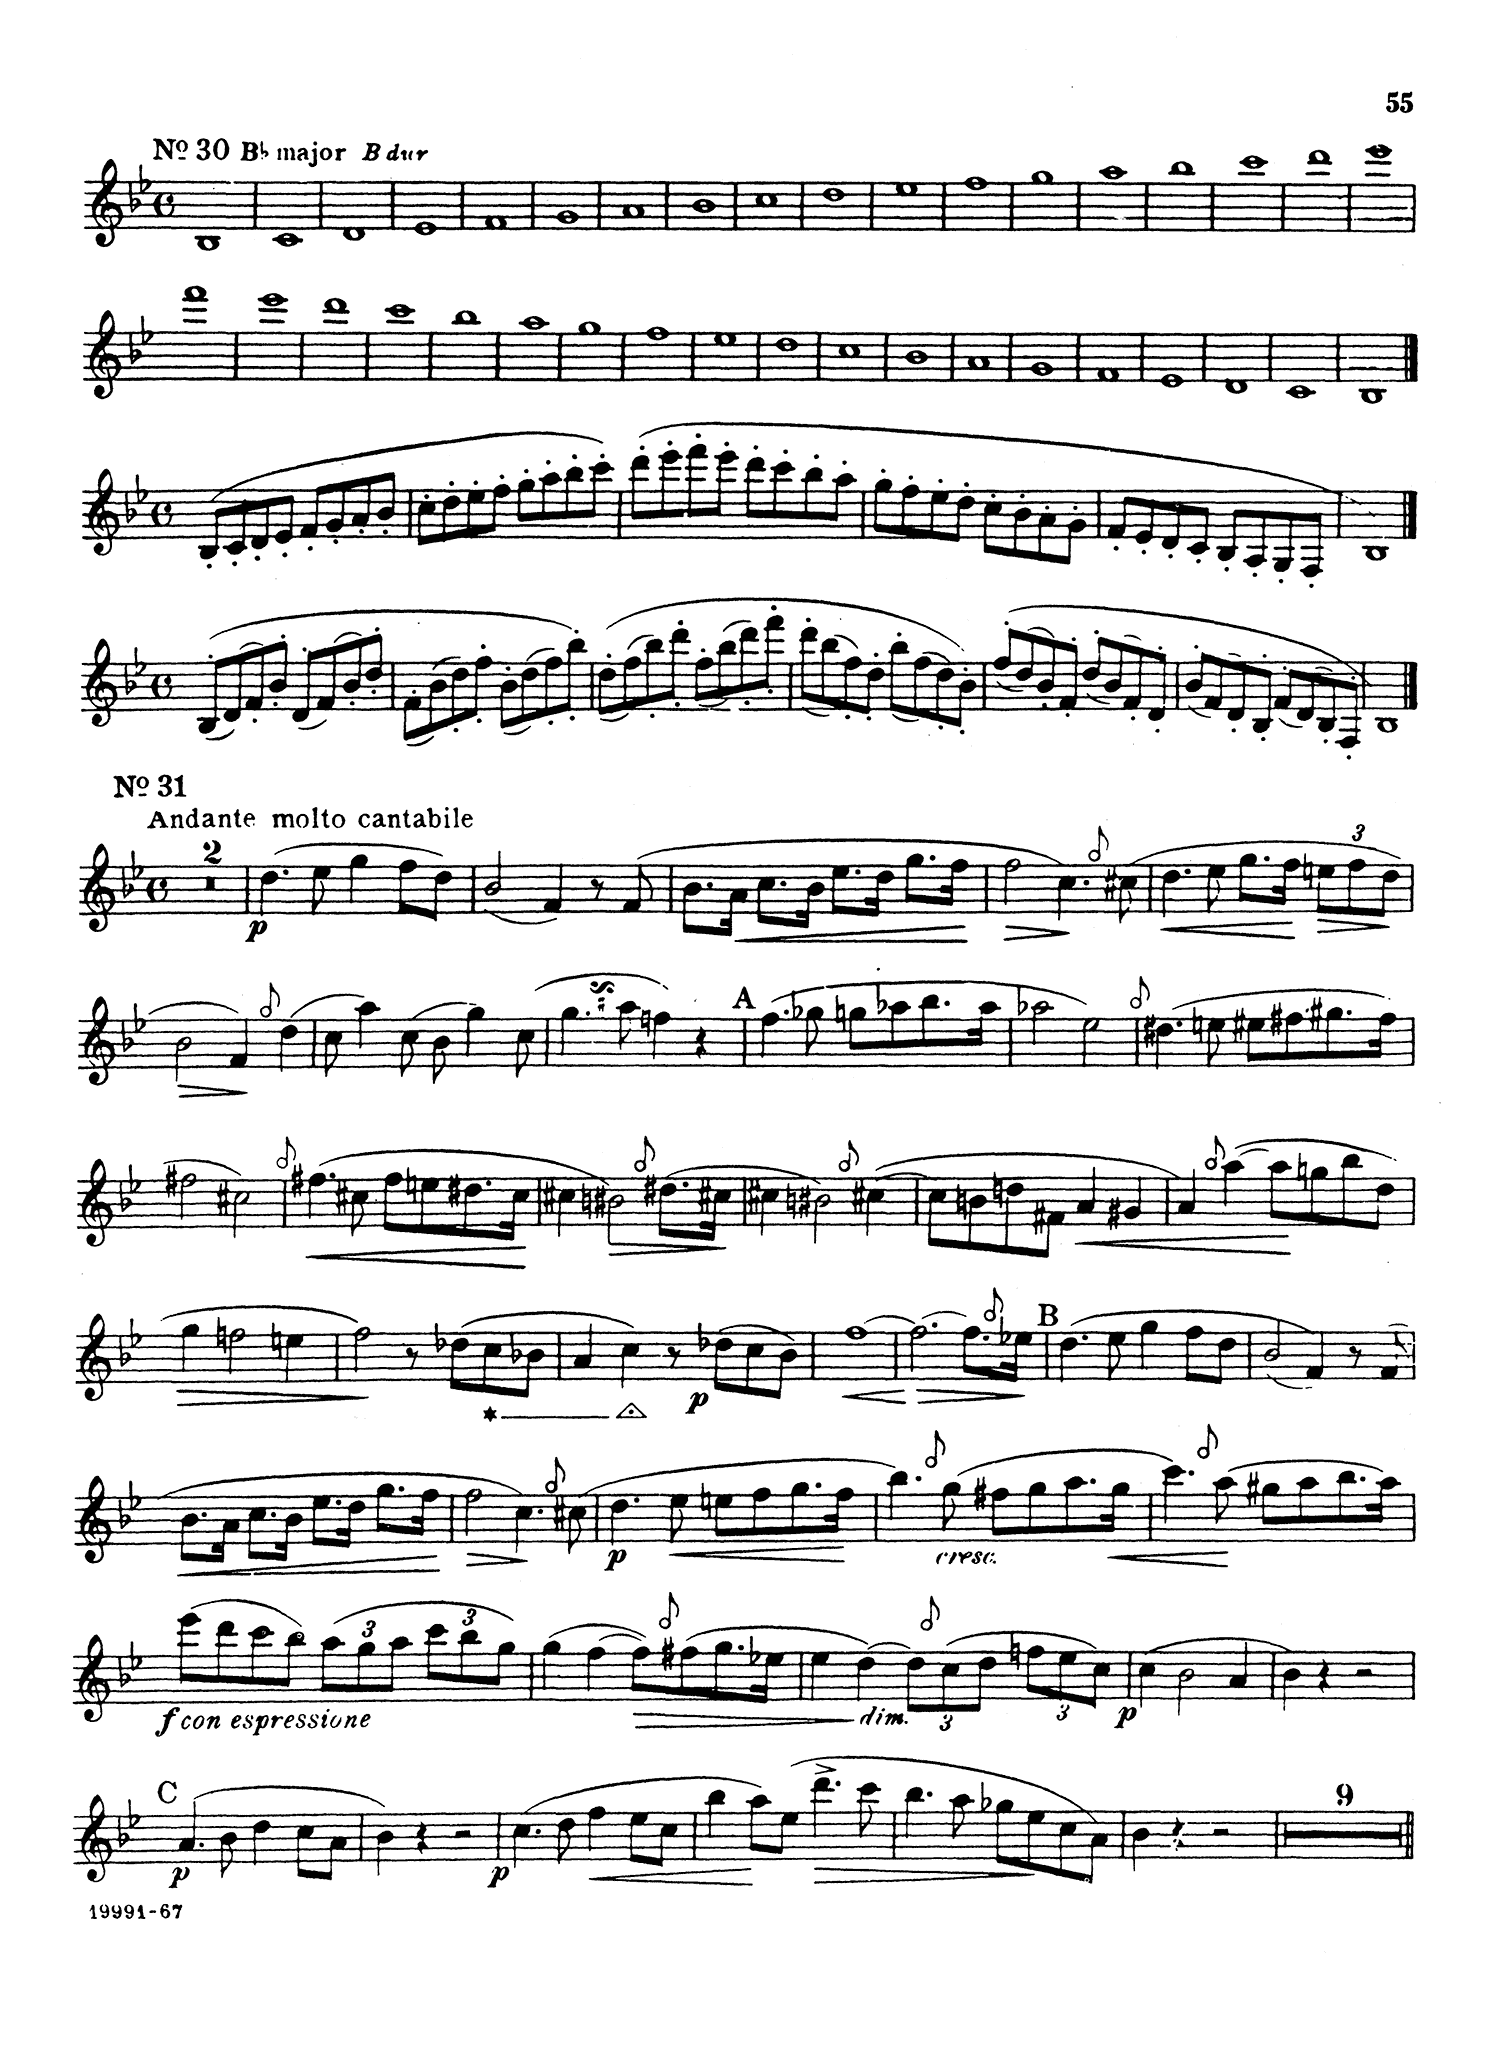 Clarinet Method, Op. 63, Divisions 1 & 2 Page 55